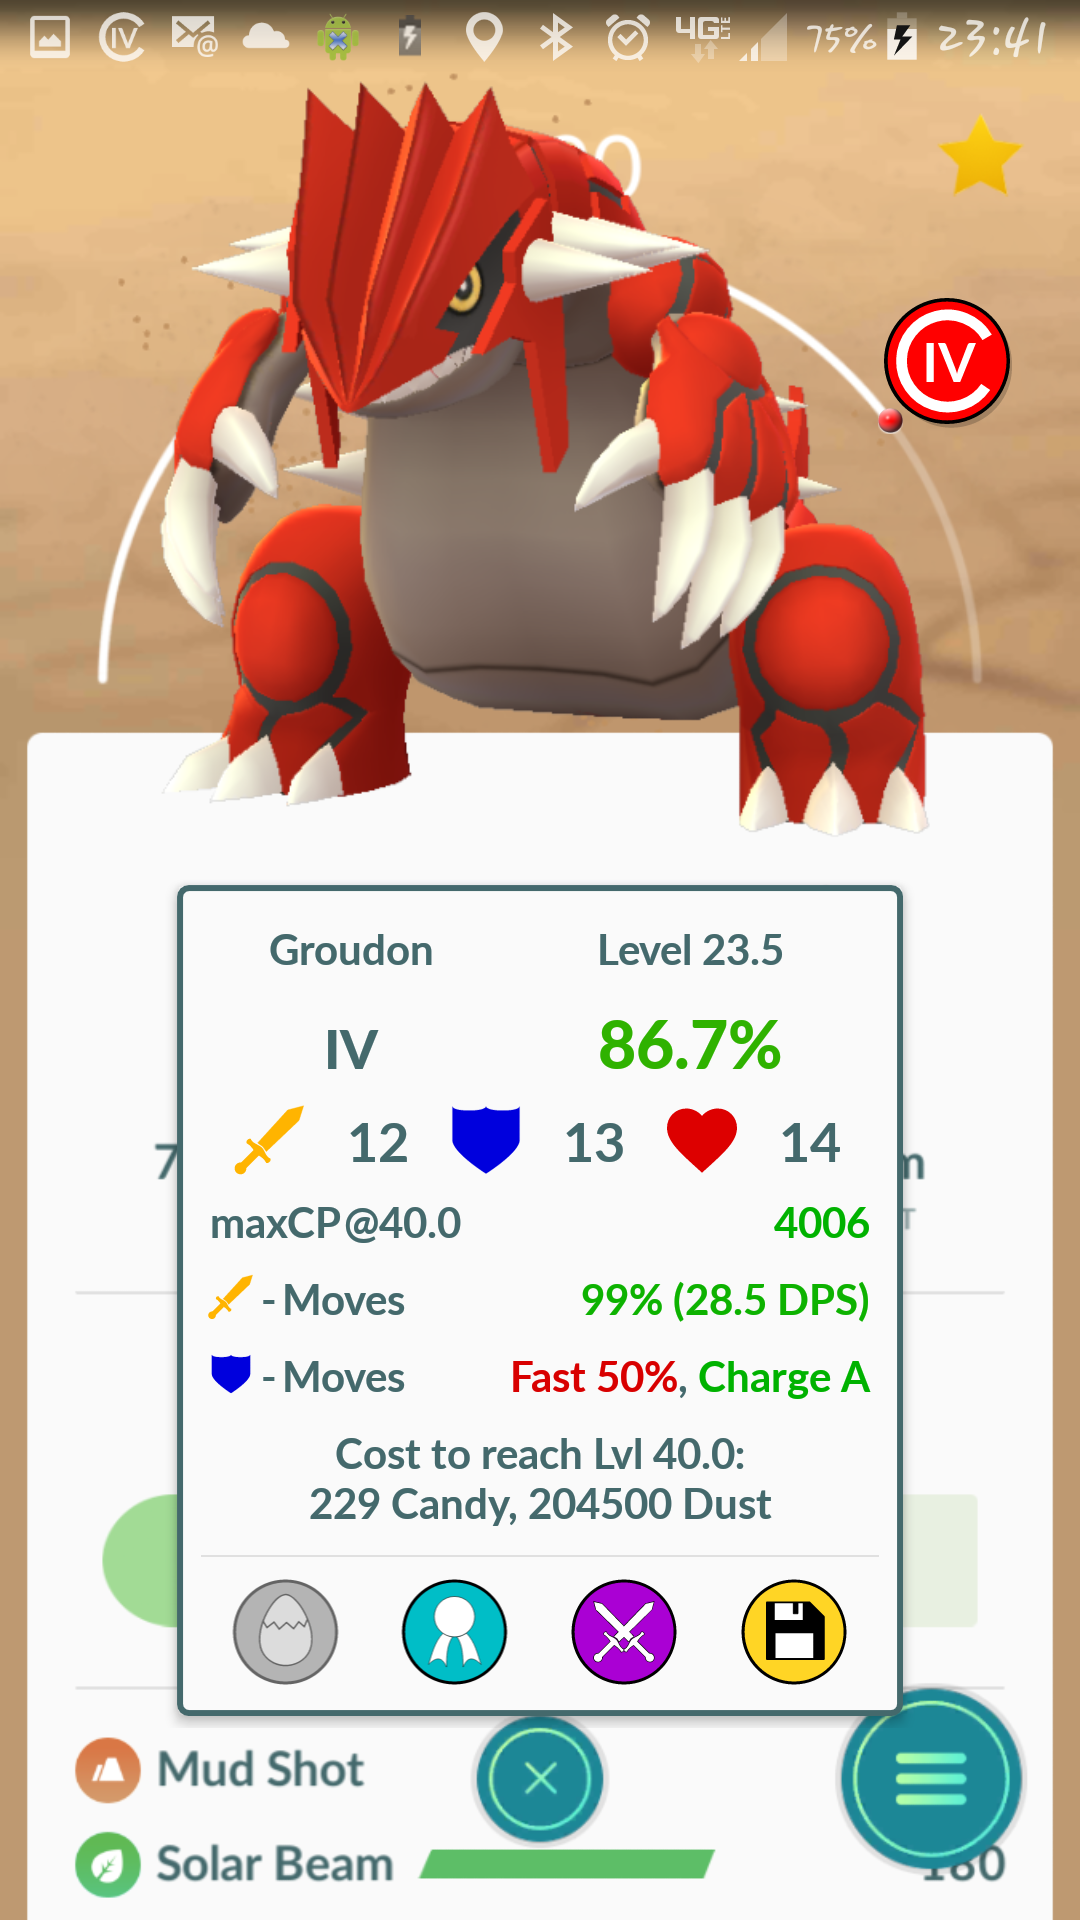 Everything you need to know about groudon in pokémon go, including its coun...